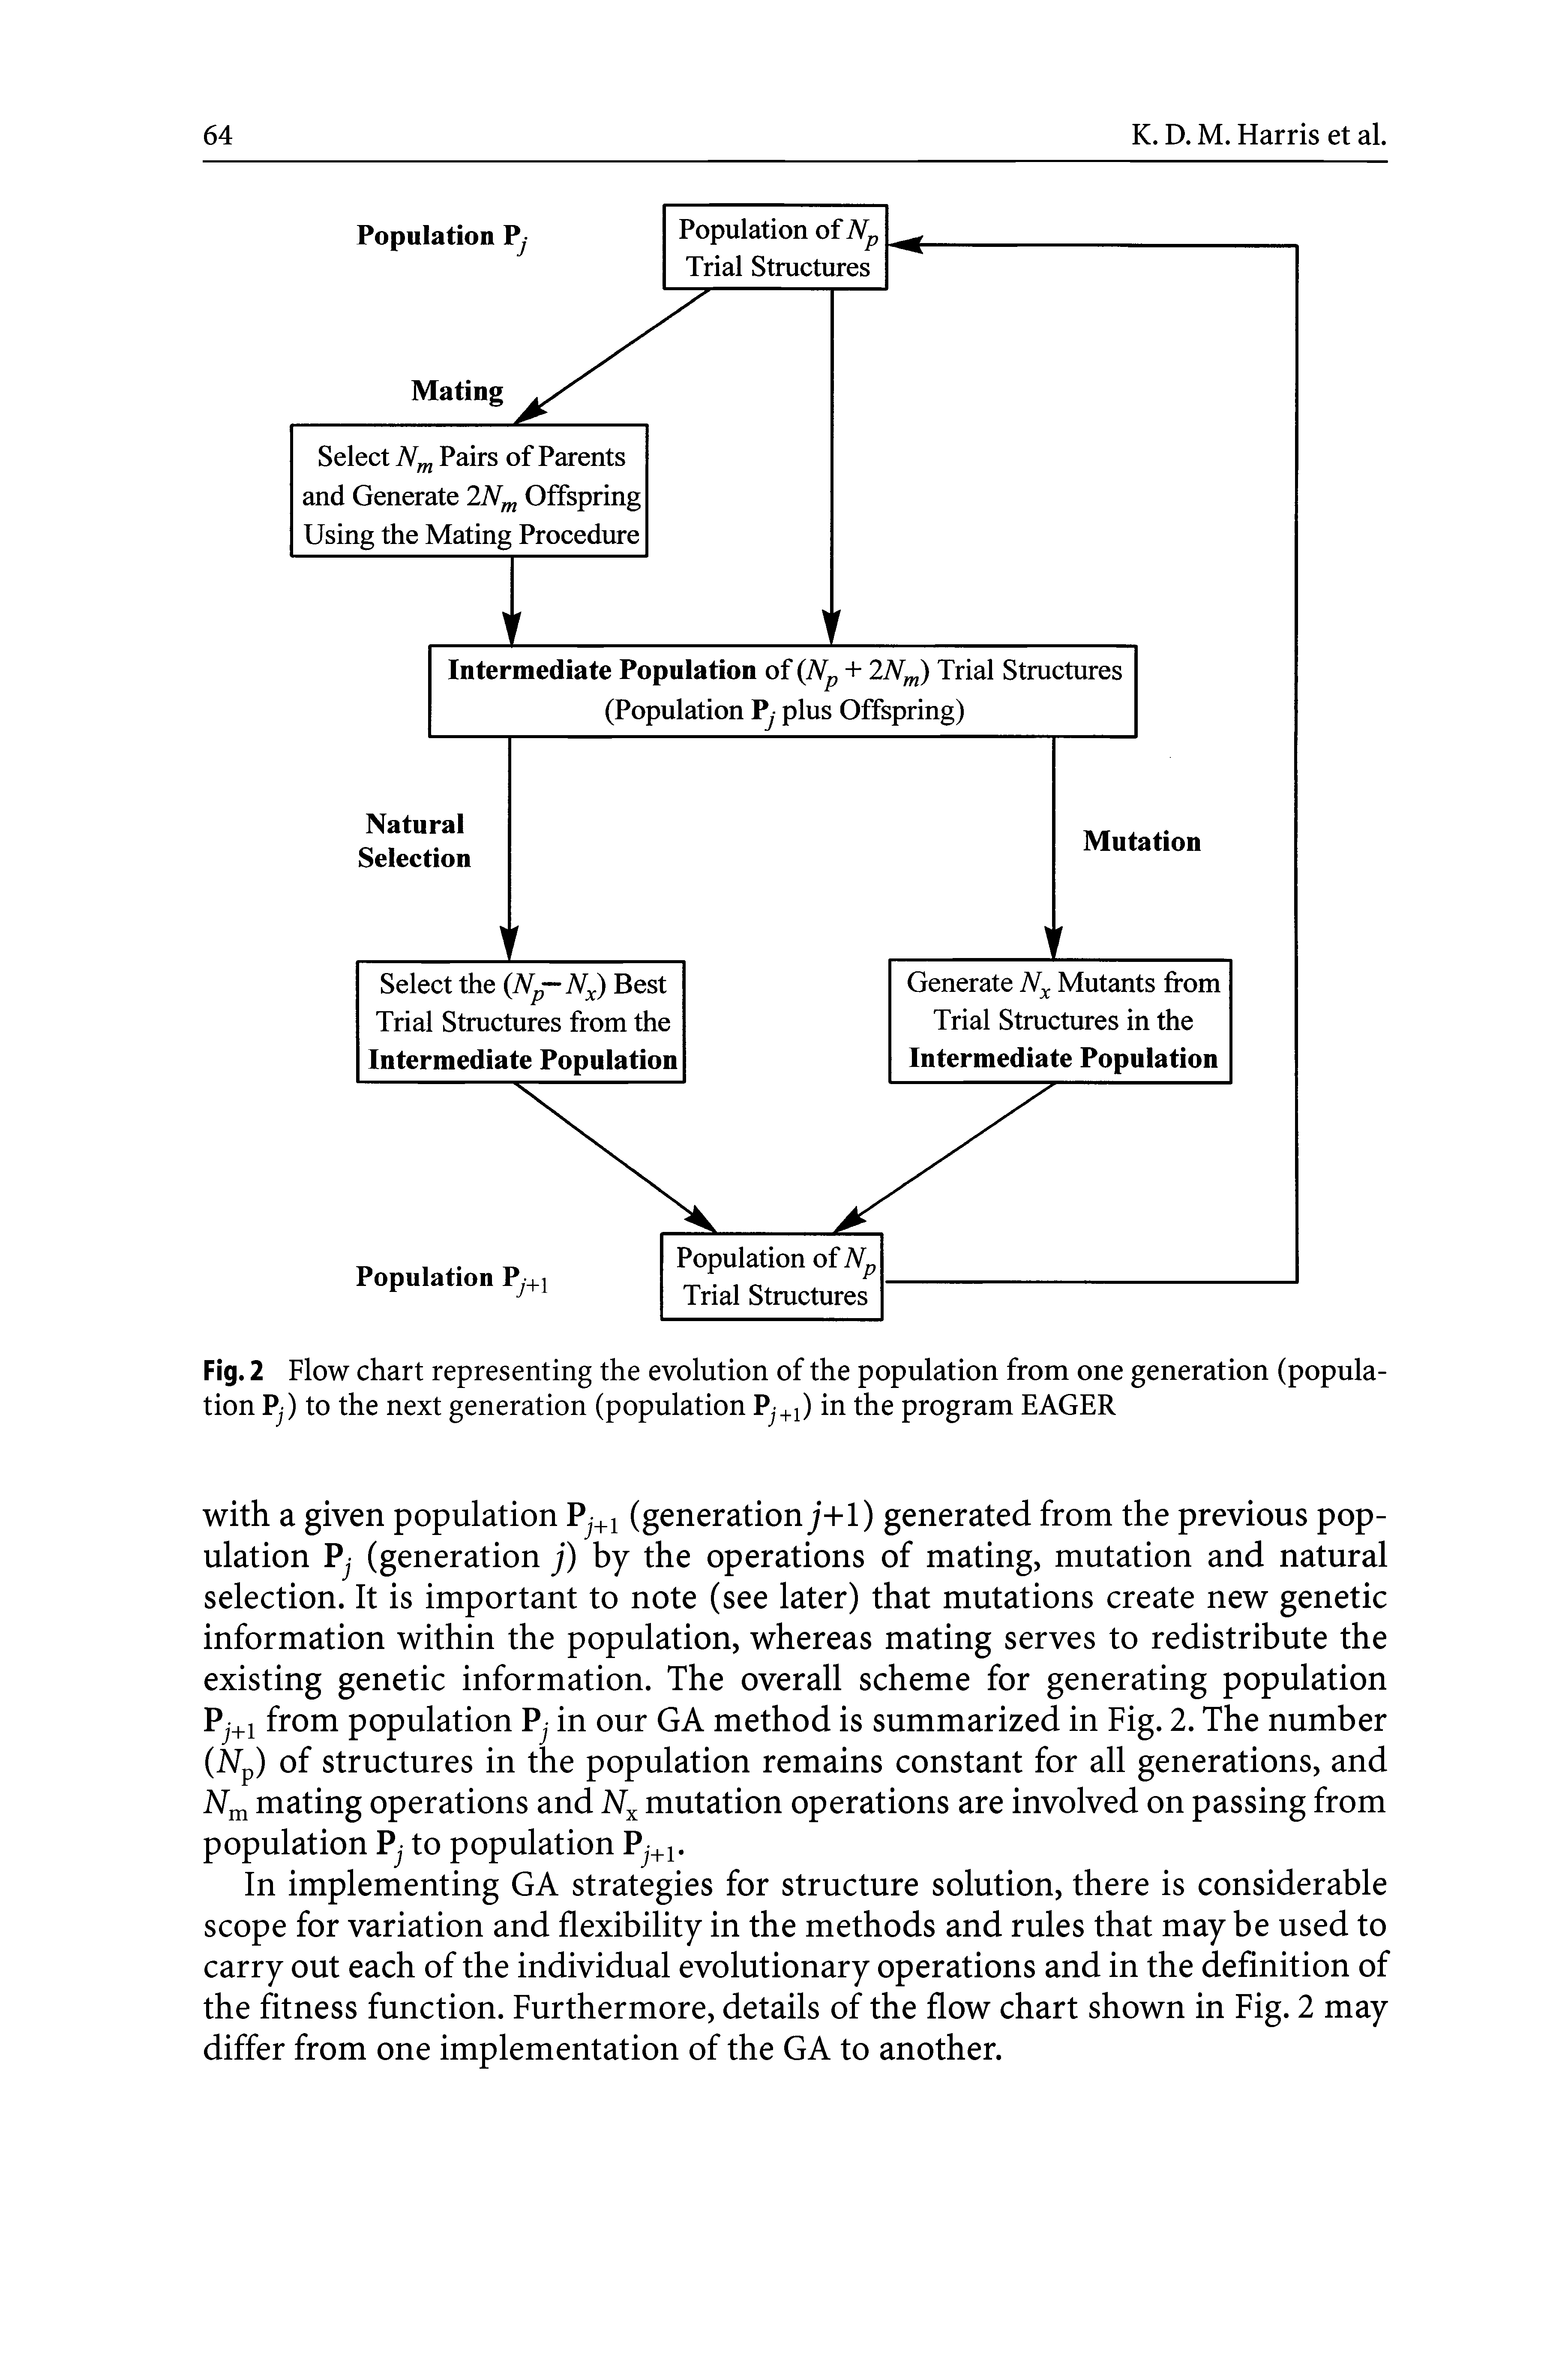 Fig. 2 Flow chart representing the evolution of the population from one generation (population P ) to the next generation (population P +1) in the program EAGER...